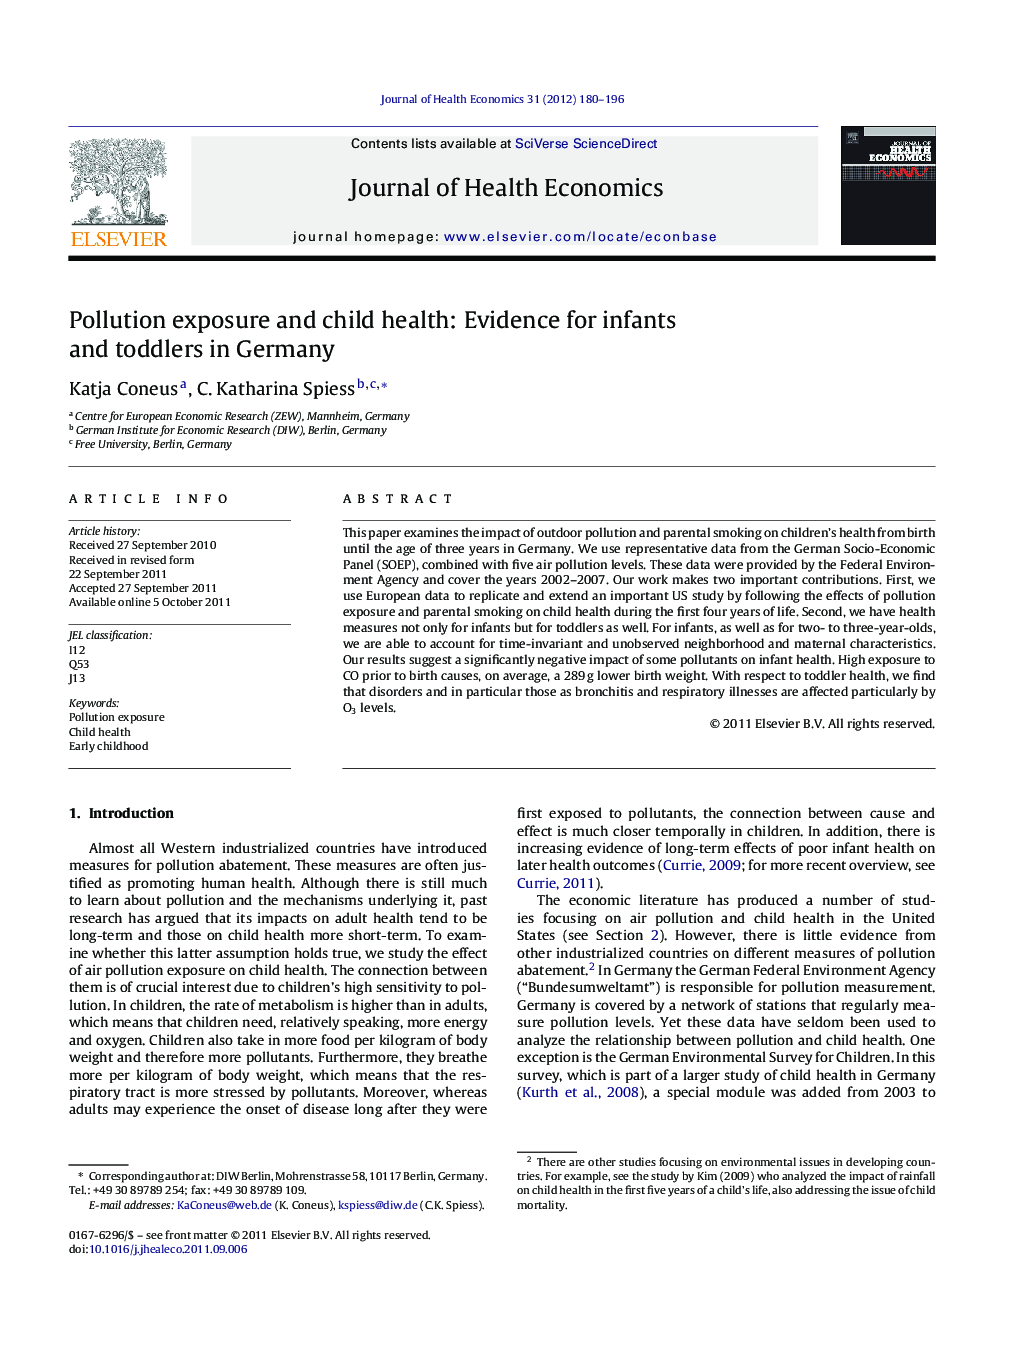 Pollution exposure and child health: Evidence for infants and toddlers in Germany